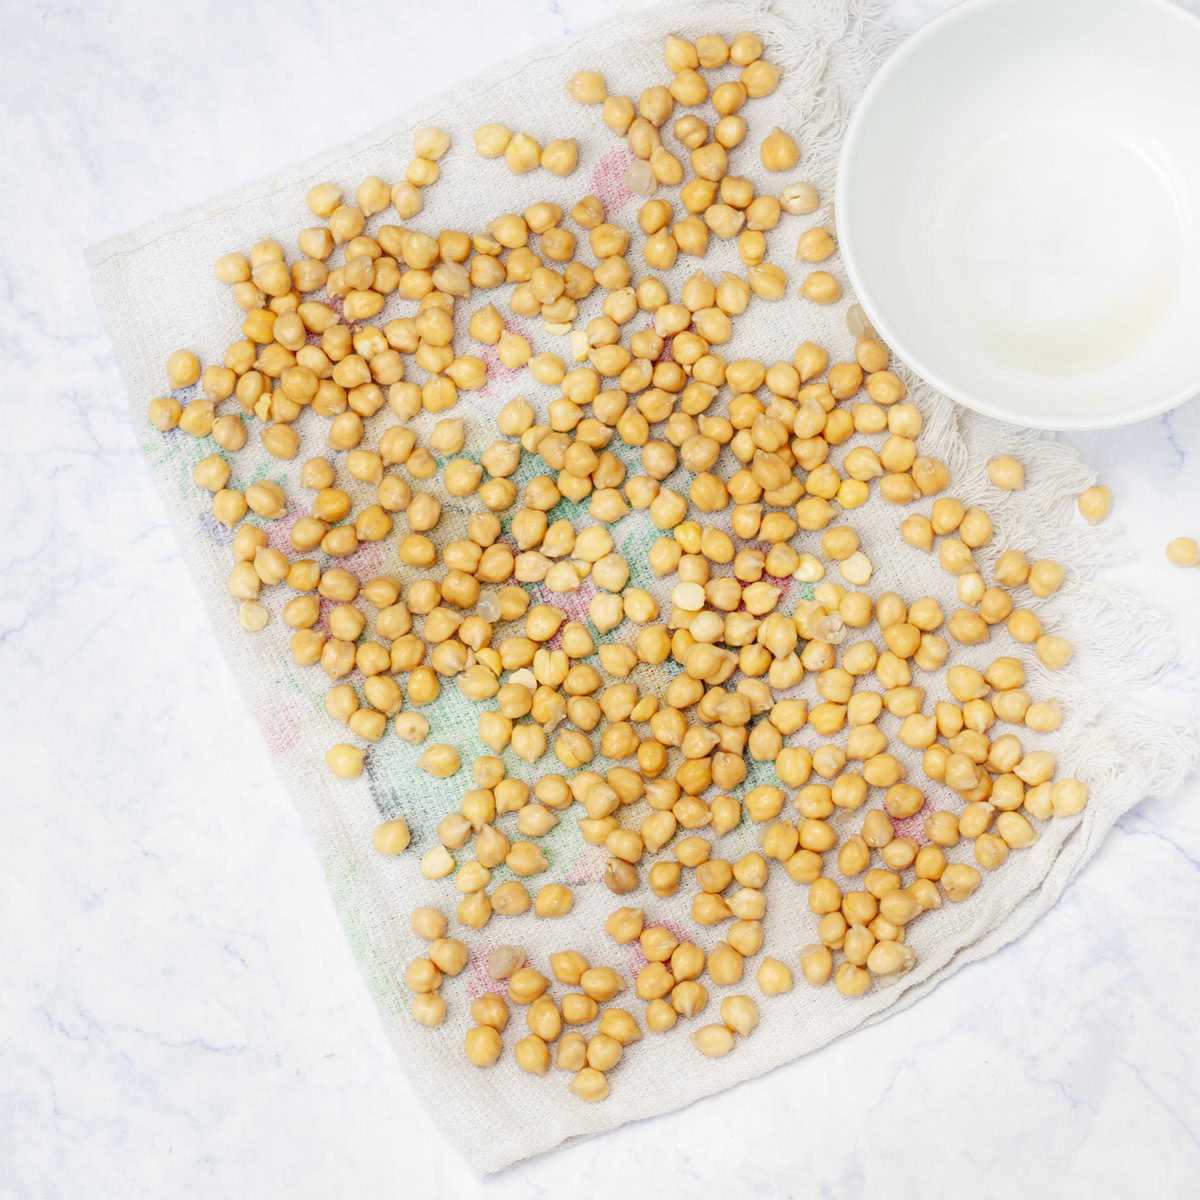 Drain the soaked chickpeas and dry on a clean towel. 